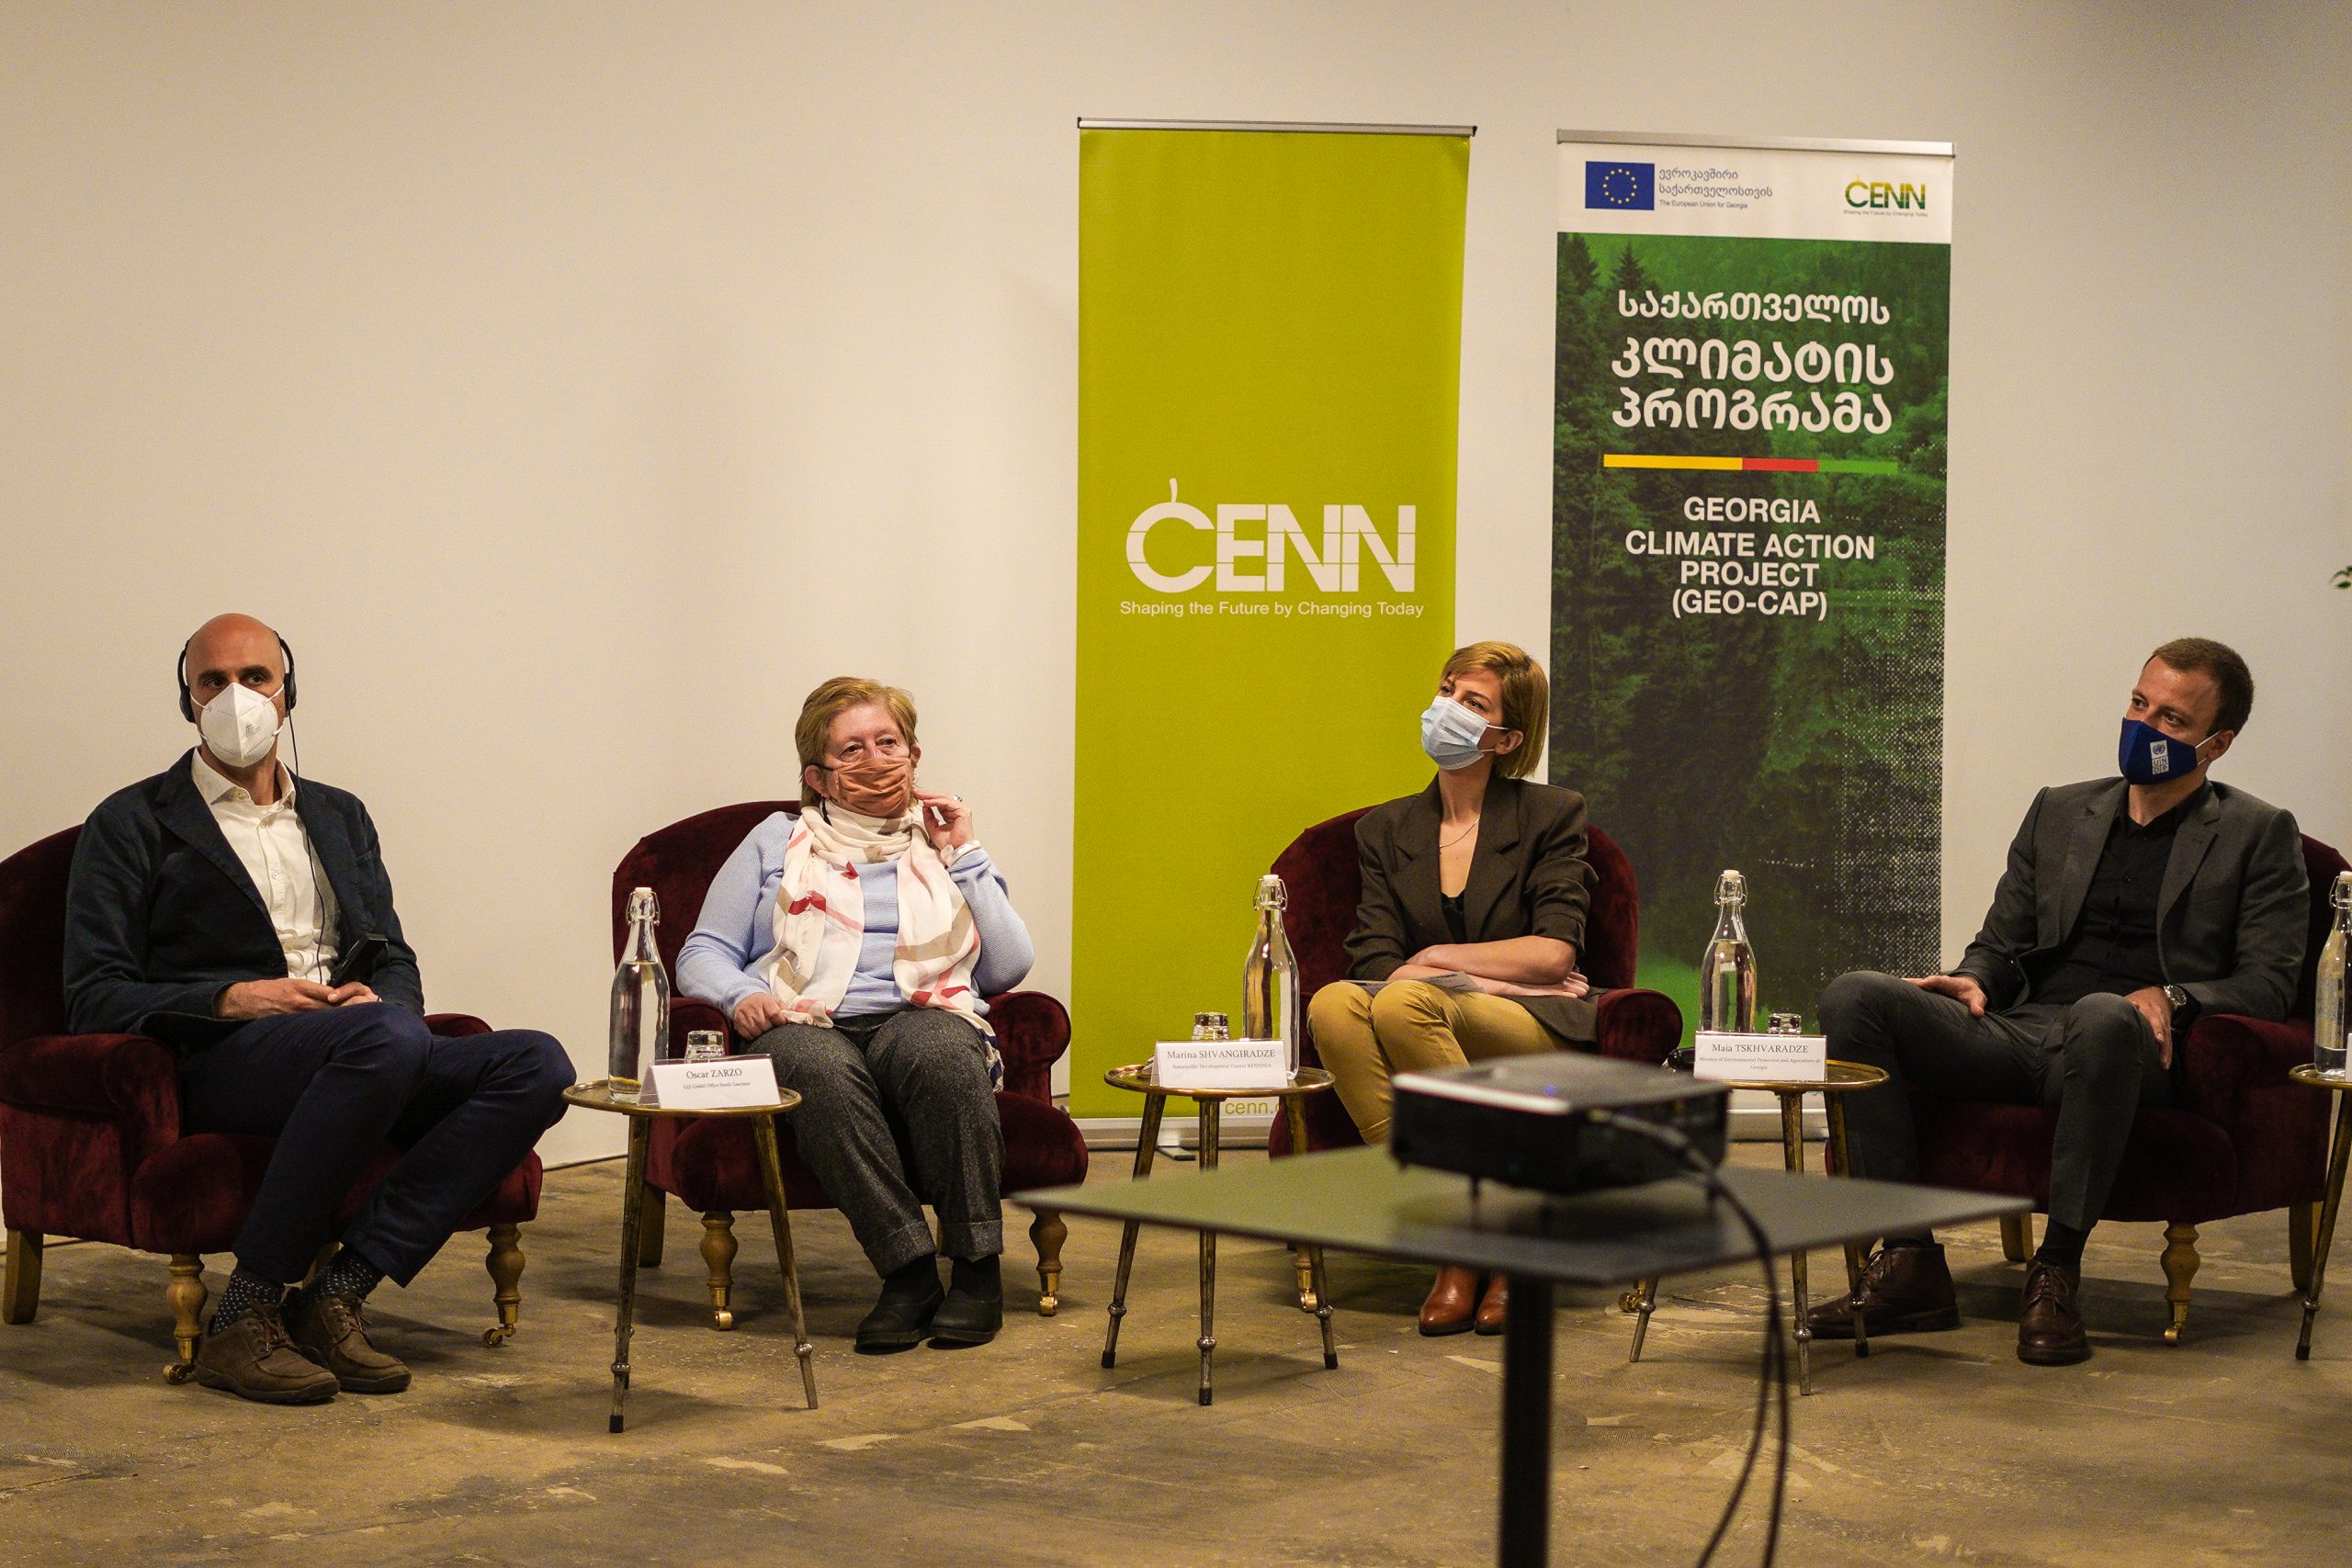 On Earth Day 2021, CENN Hosts Kick-Off Meeting of EU Supported Georgia Climate Action Project.